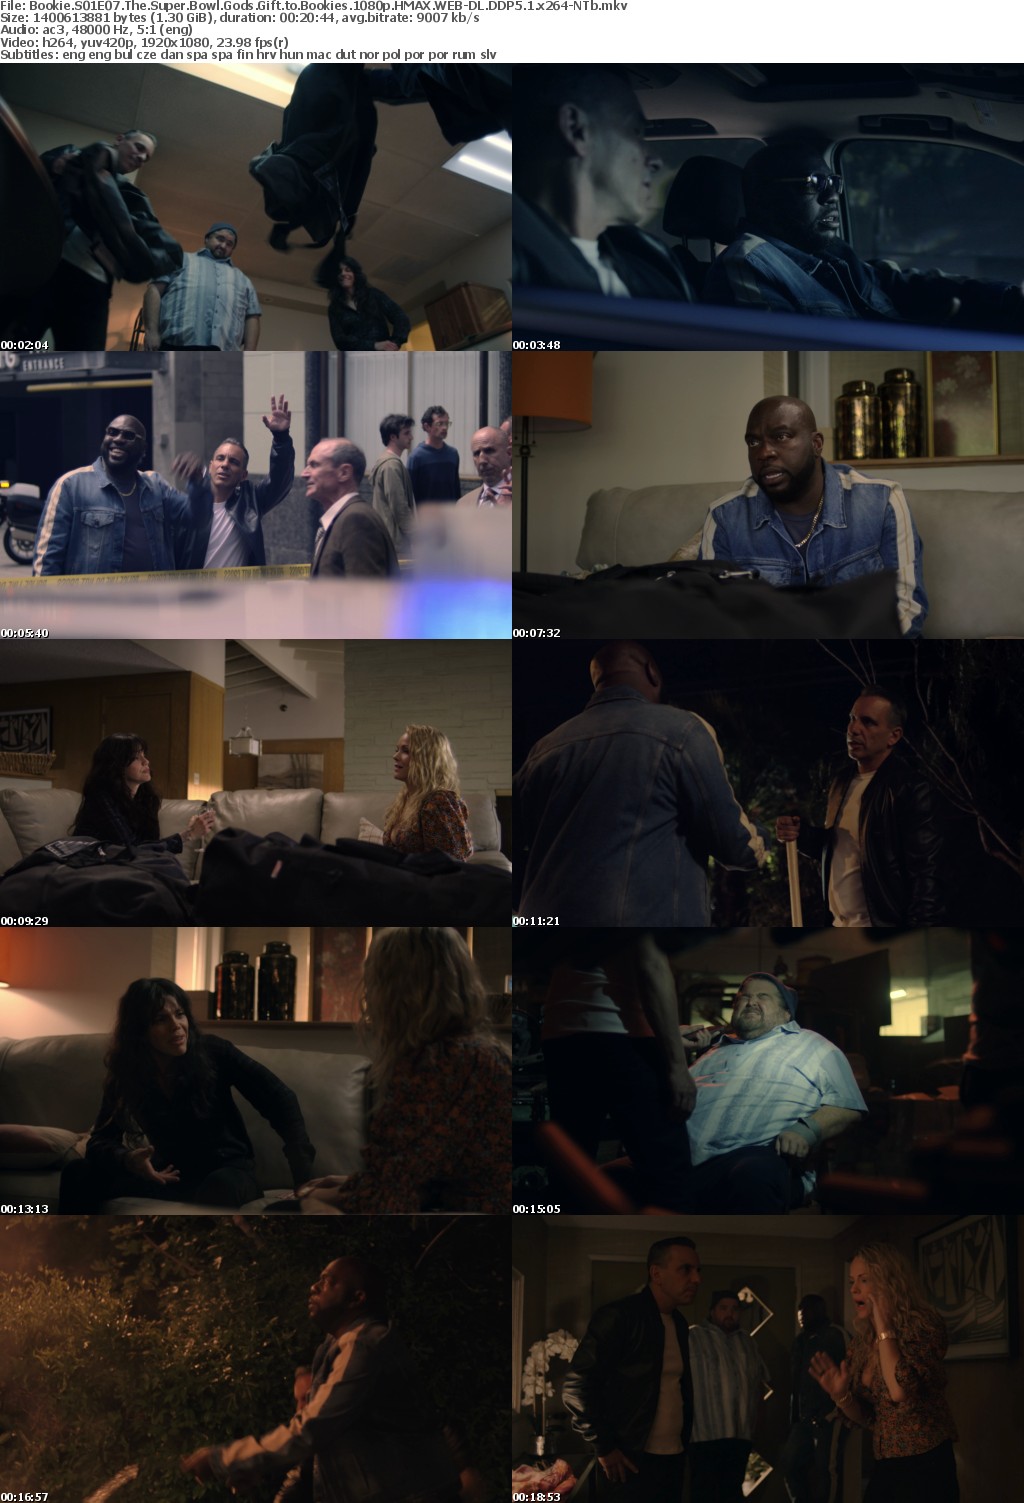 Bookie S01E07 The Super Bowl Gods Gift to Bookies 1080p HMAX WEB-DL DDP5 1 x264-NTb